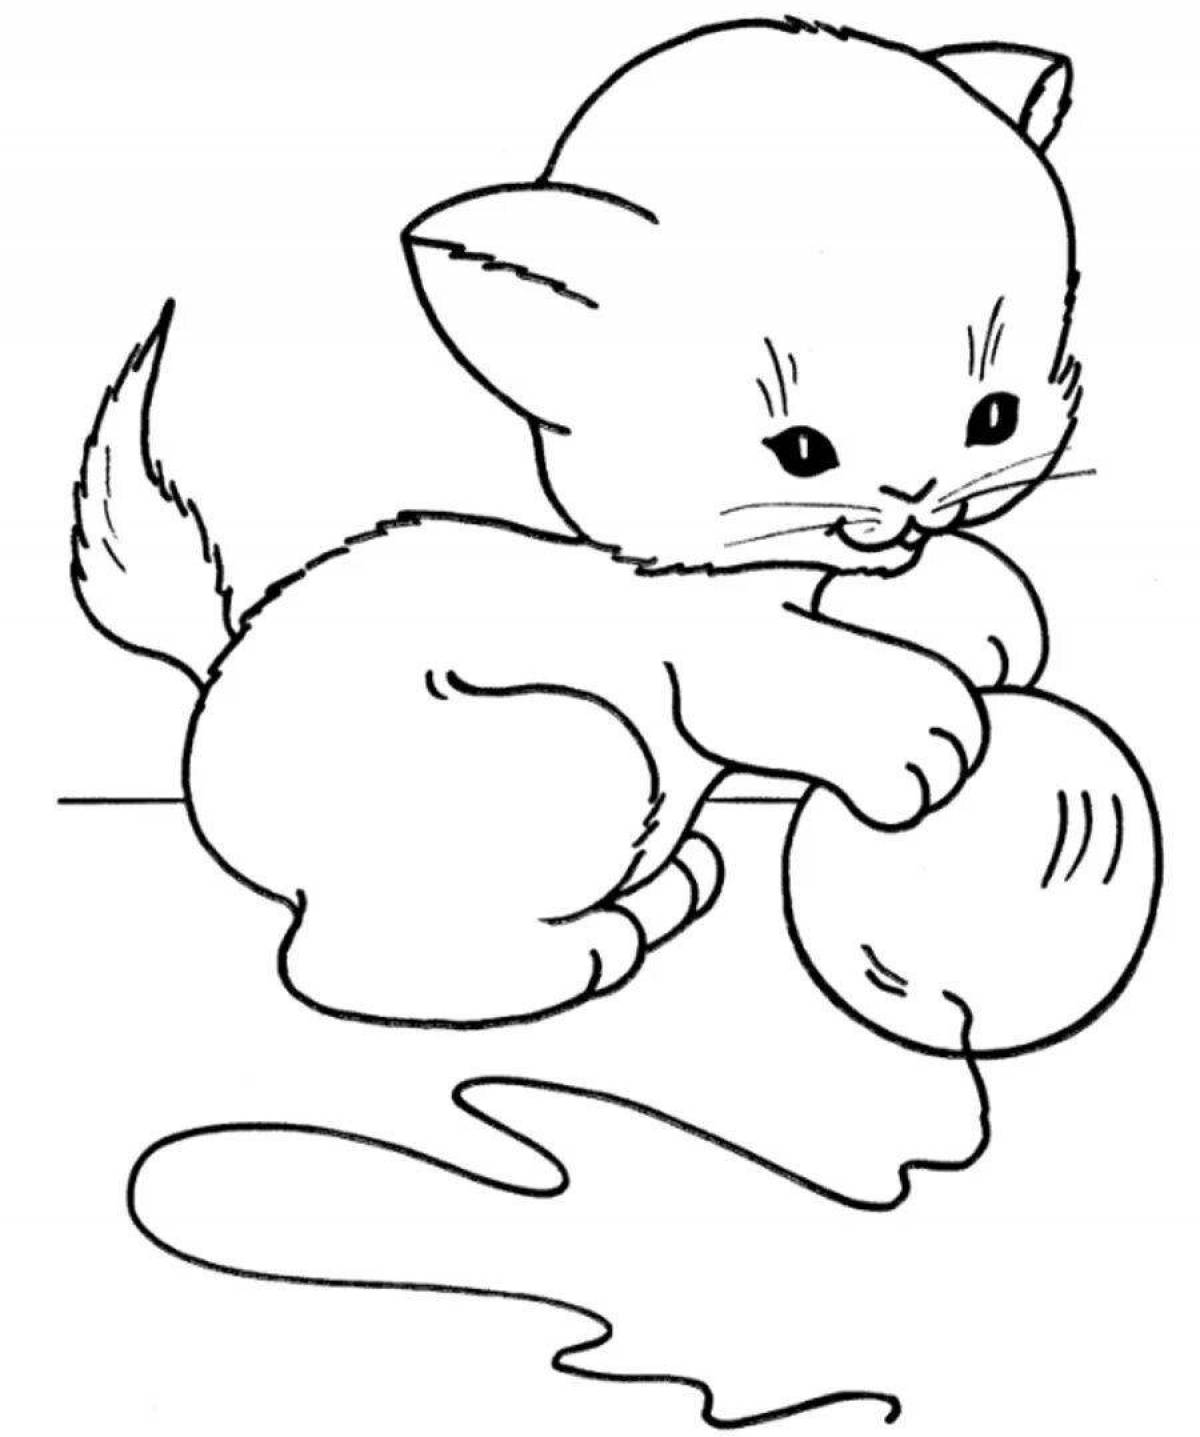 Humorous kitten coloring book for 2-3 year olds